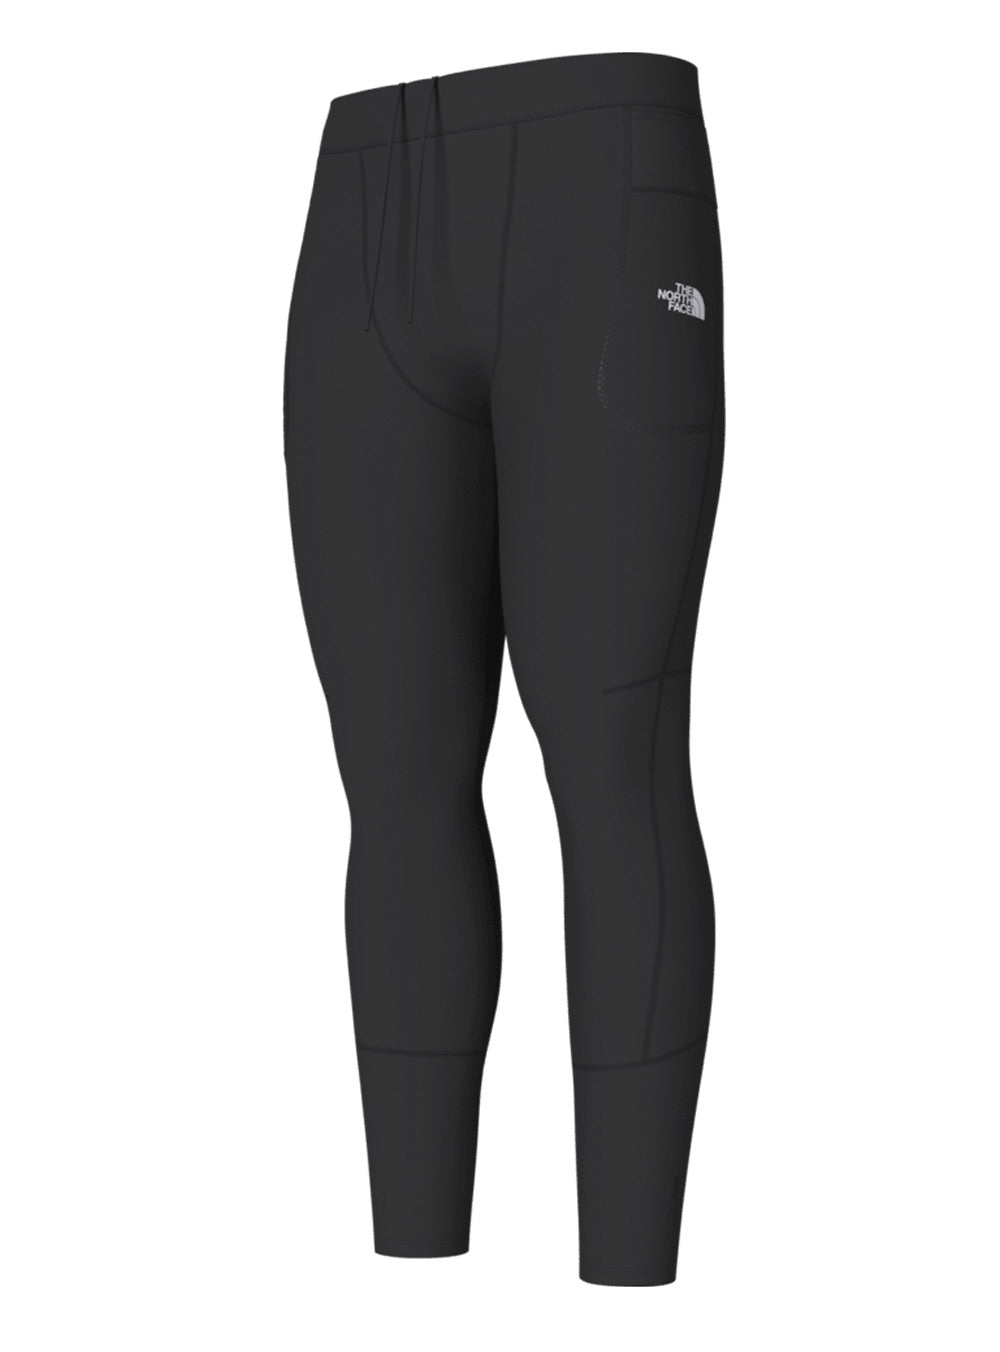 THE NORTH FACE The North Face WINTER WARM - Tights - Men's - black